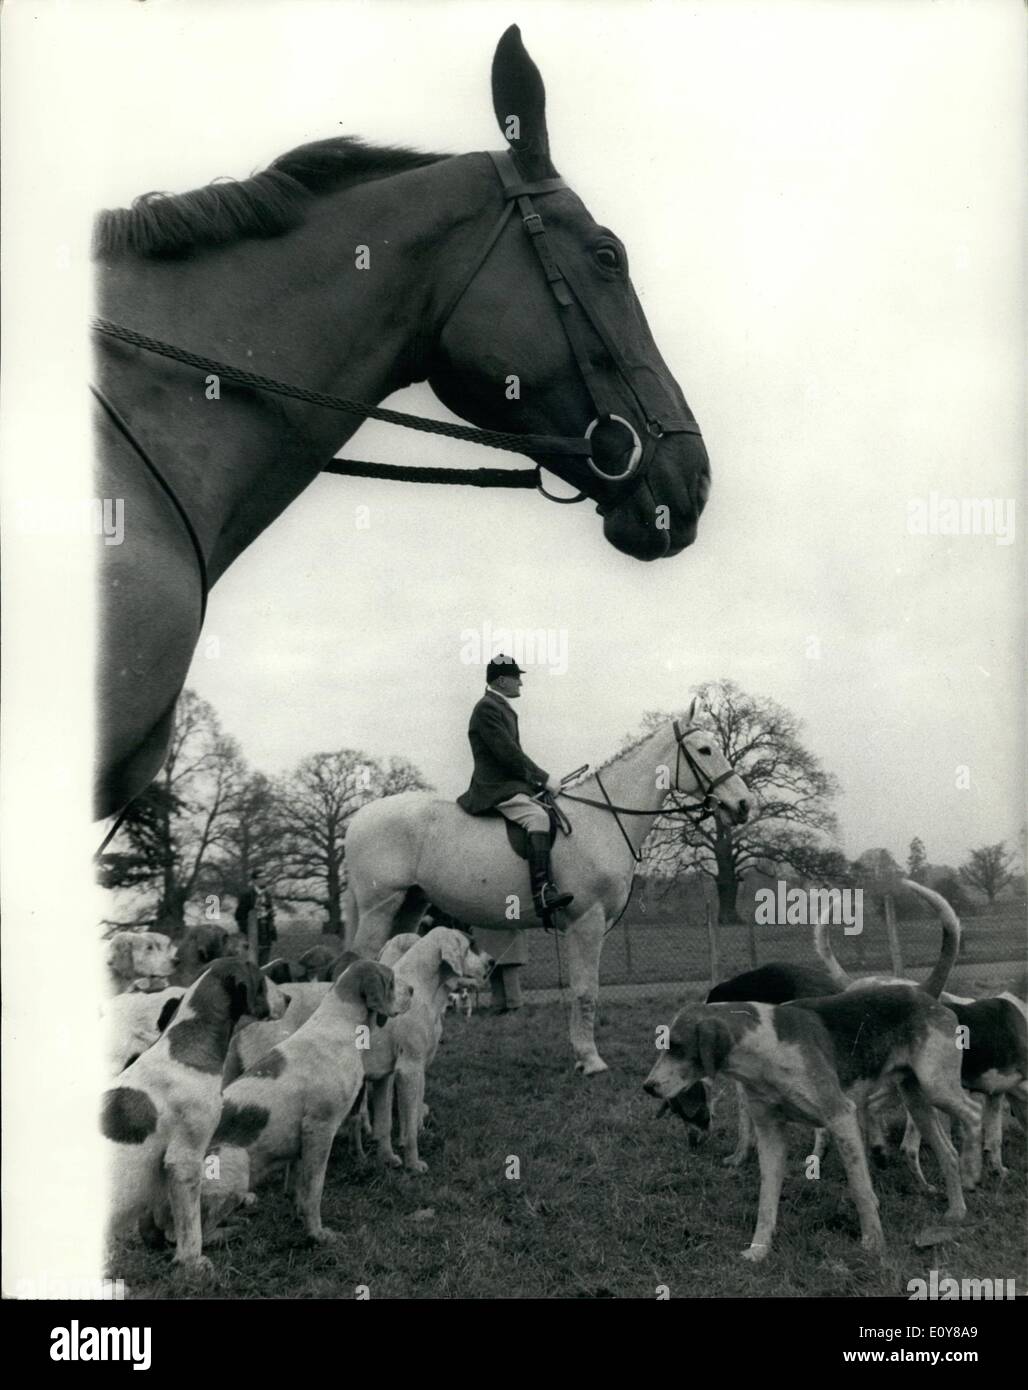 Feb. 01, 1969 - February 1st 1969 The Enfield Chace Foxhounds move off from Broxbourne School Herts. The Enfield Chace Foxhounds meet this morning at Broxbourne School for Girls, in Broxbourne, Herts. Giving the girl pupils a grand opportunity to see the colourful turn-out of the hunt meet. Photo Shows: The picturesque view showing some of the hounds and a huntsman before the move off this morning. Stock Photo